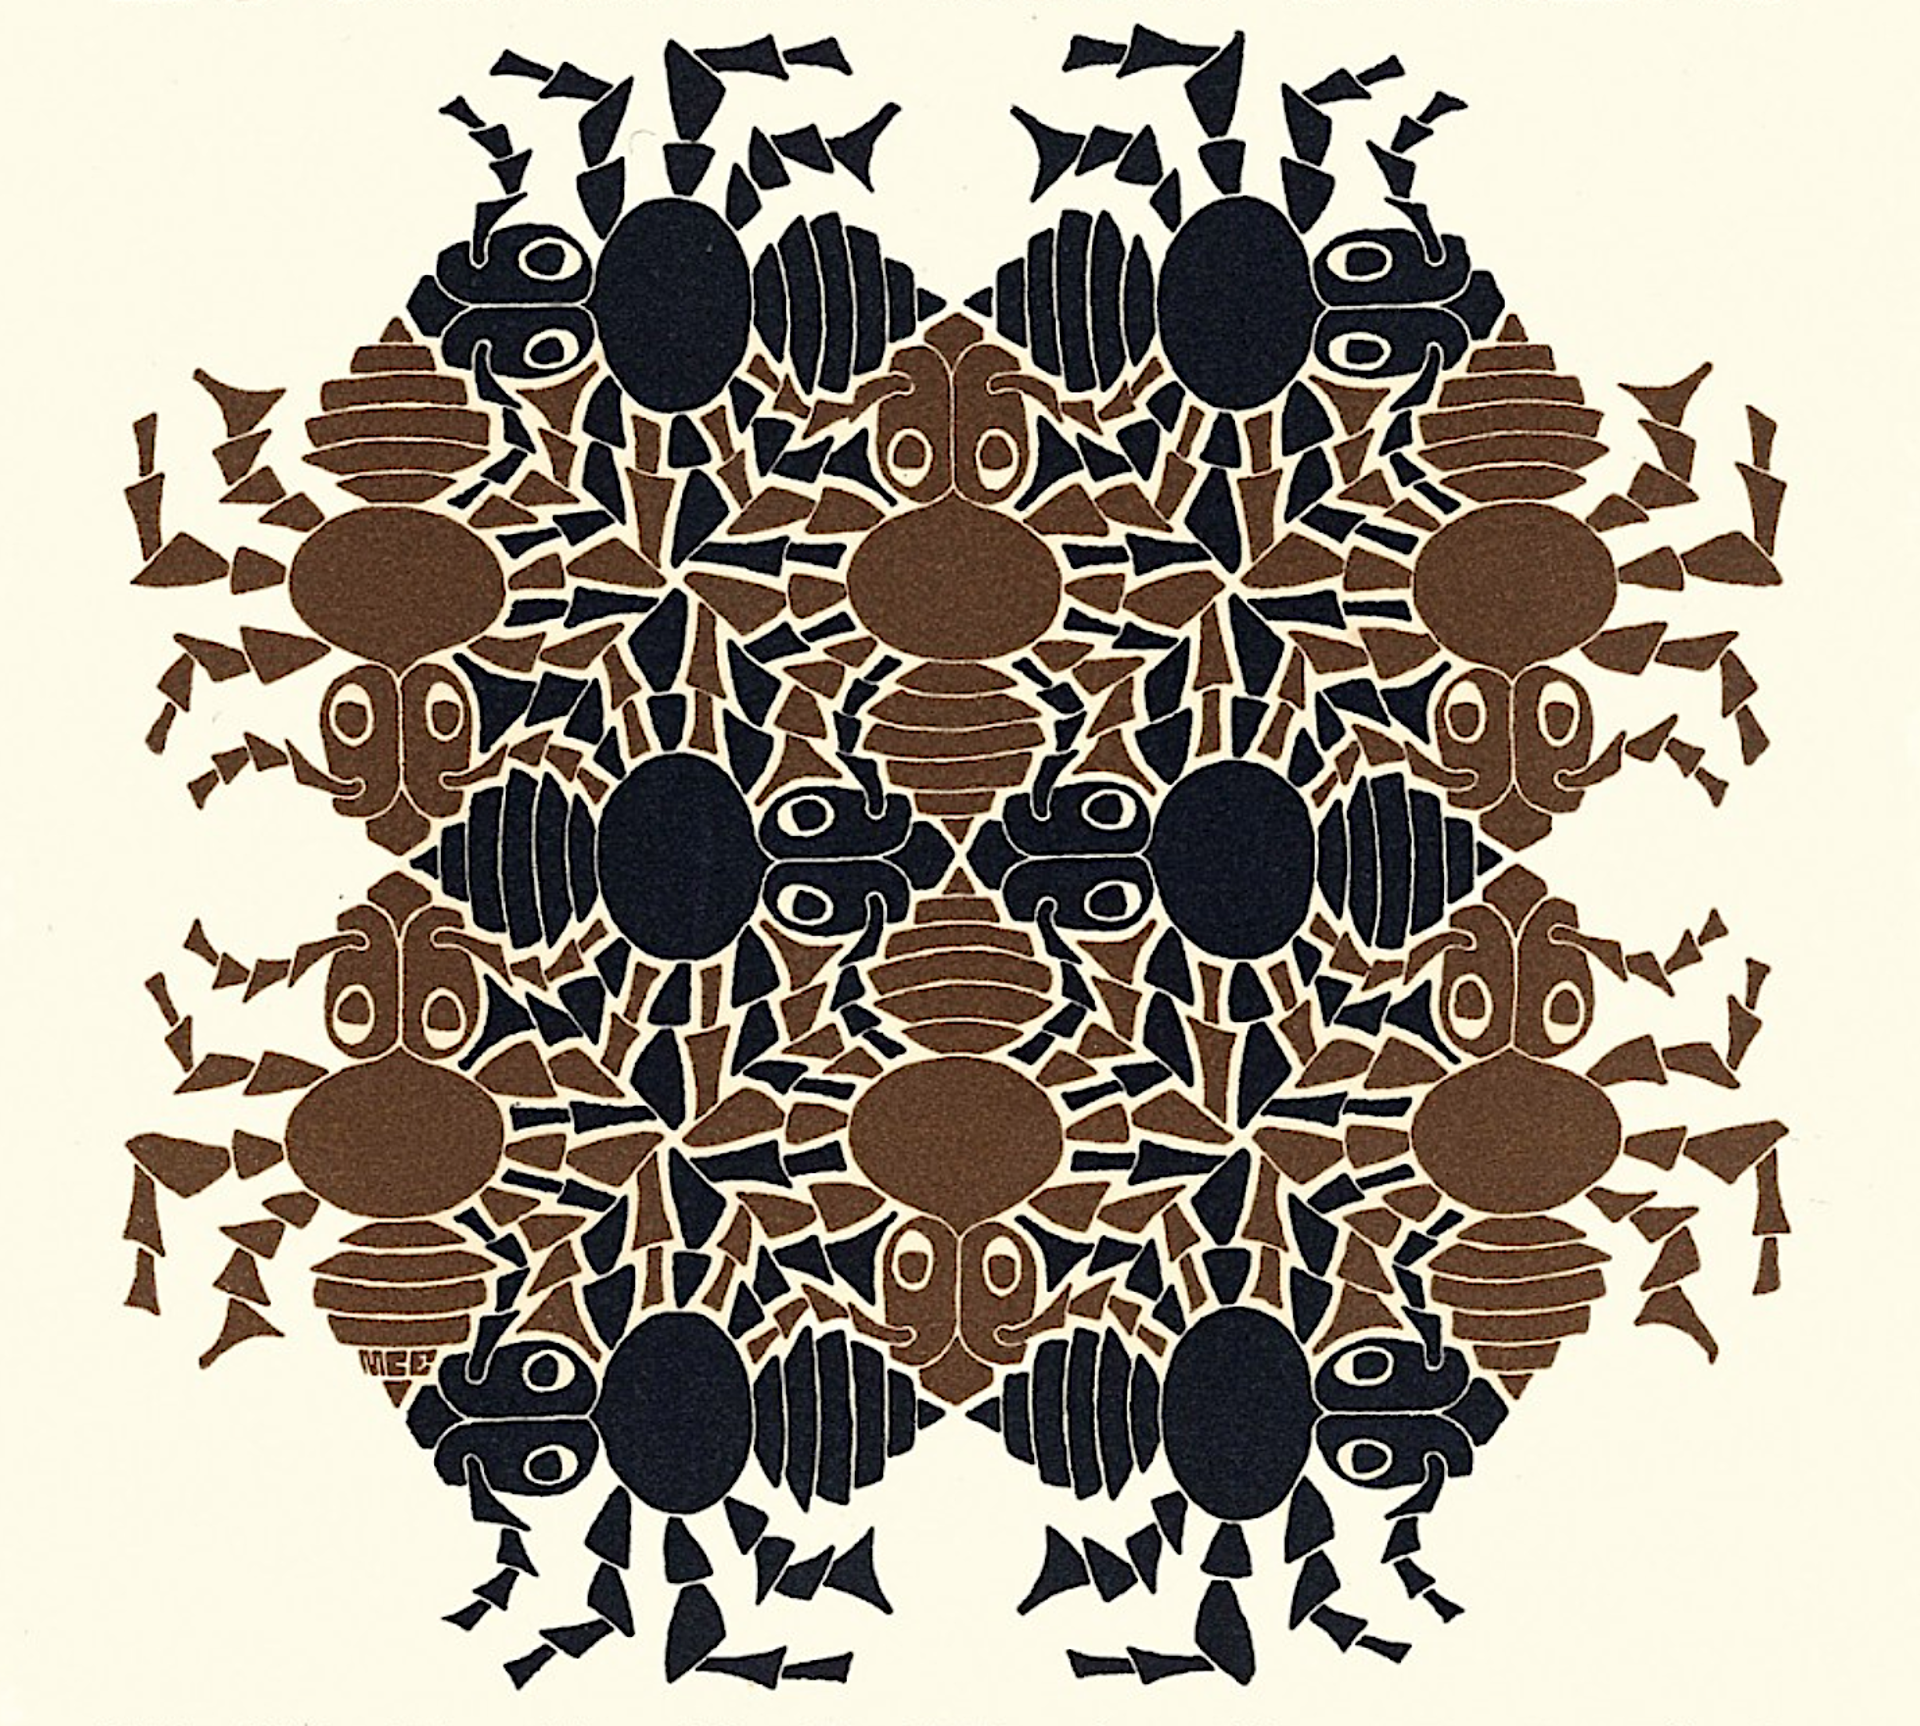 Earth - Strens New Year's Greeting Card (Ants) by M.C. Escher